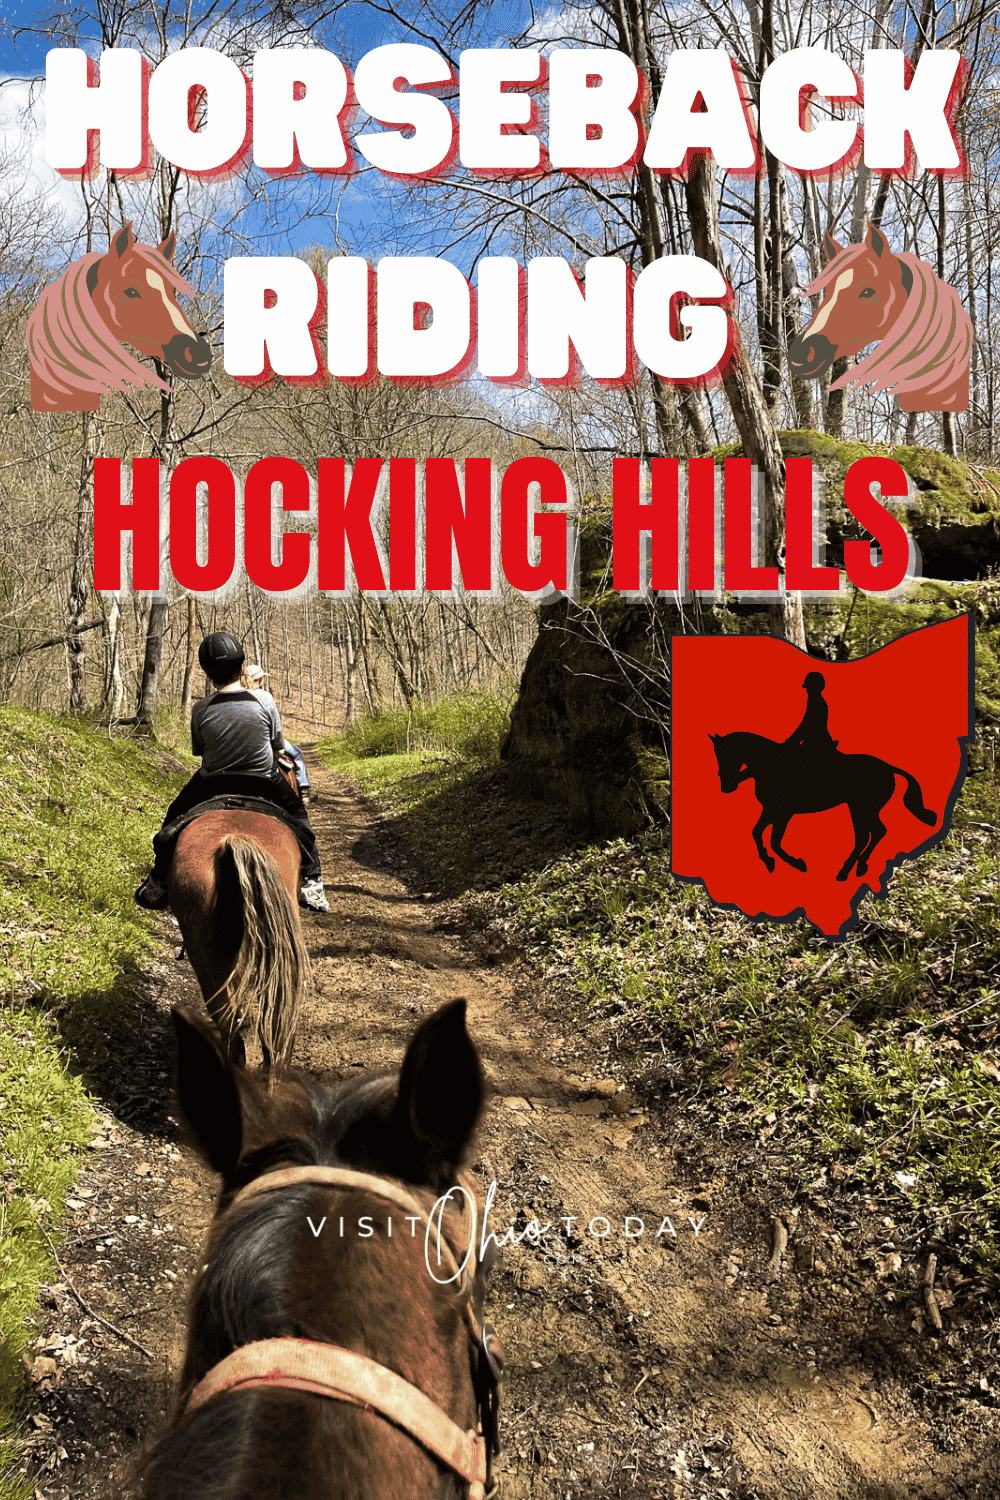 Ever considered Horseback Riding Hocking Hills? Make it a reality by going Horseback Riding in the stunning Ohio countryside at Hocking Hills Horse Rides! | Horseback Riding In Ohio | Hocking Hills Horse Rides | Ohio Horses